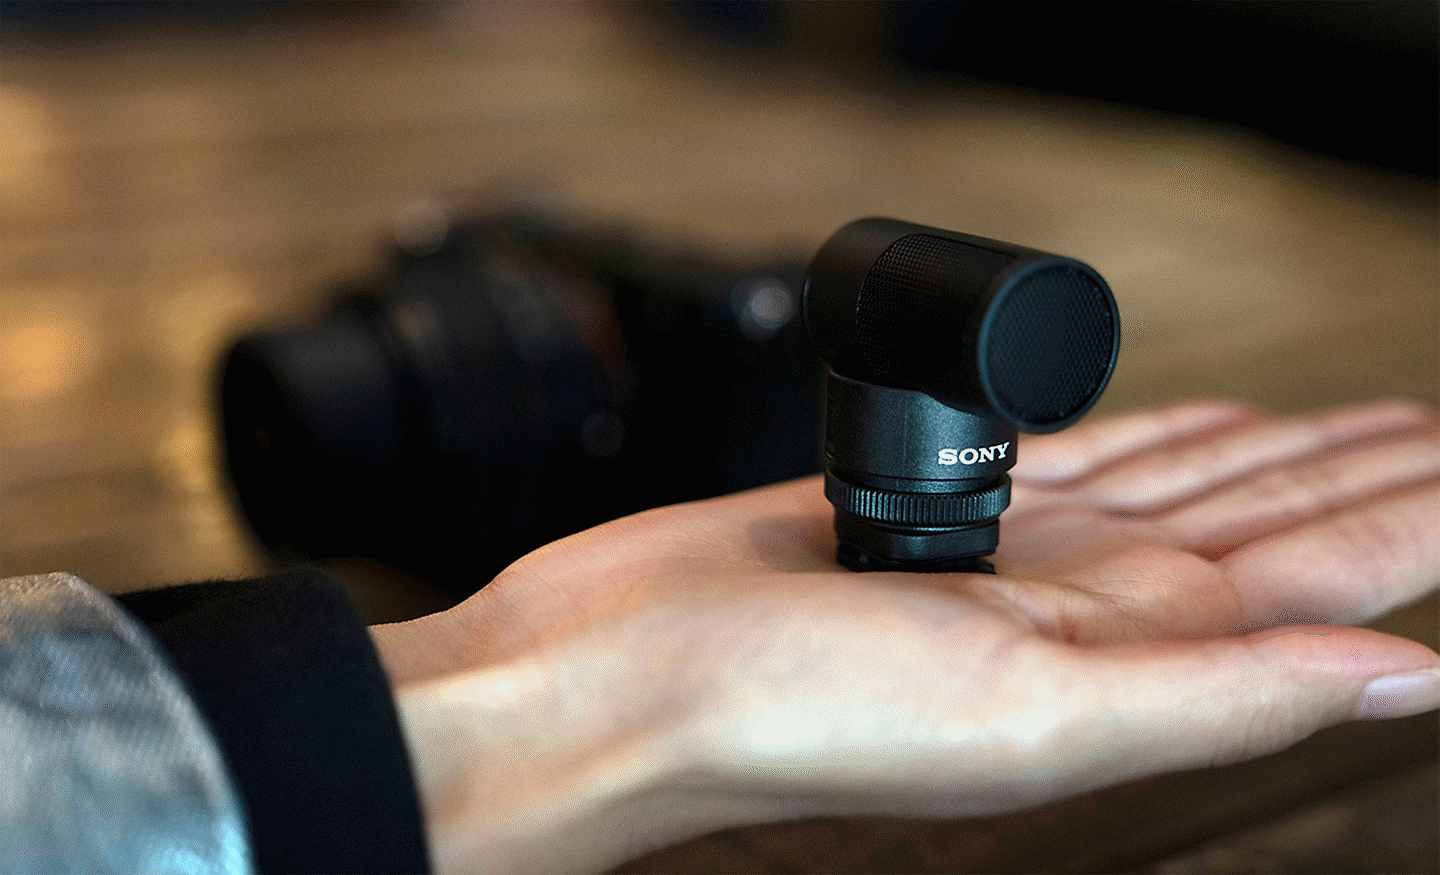 A photo of the ECM-G1 on the hand, compact enough to fit in one hand.